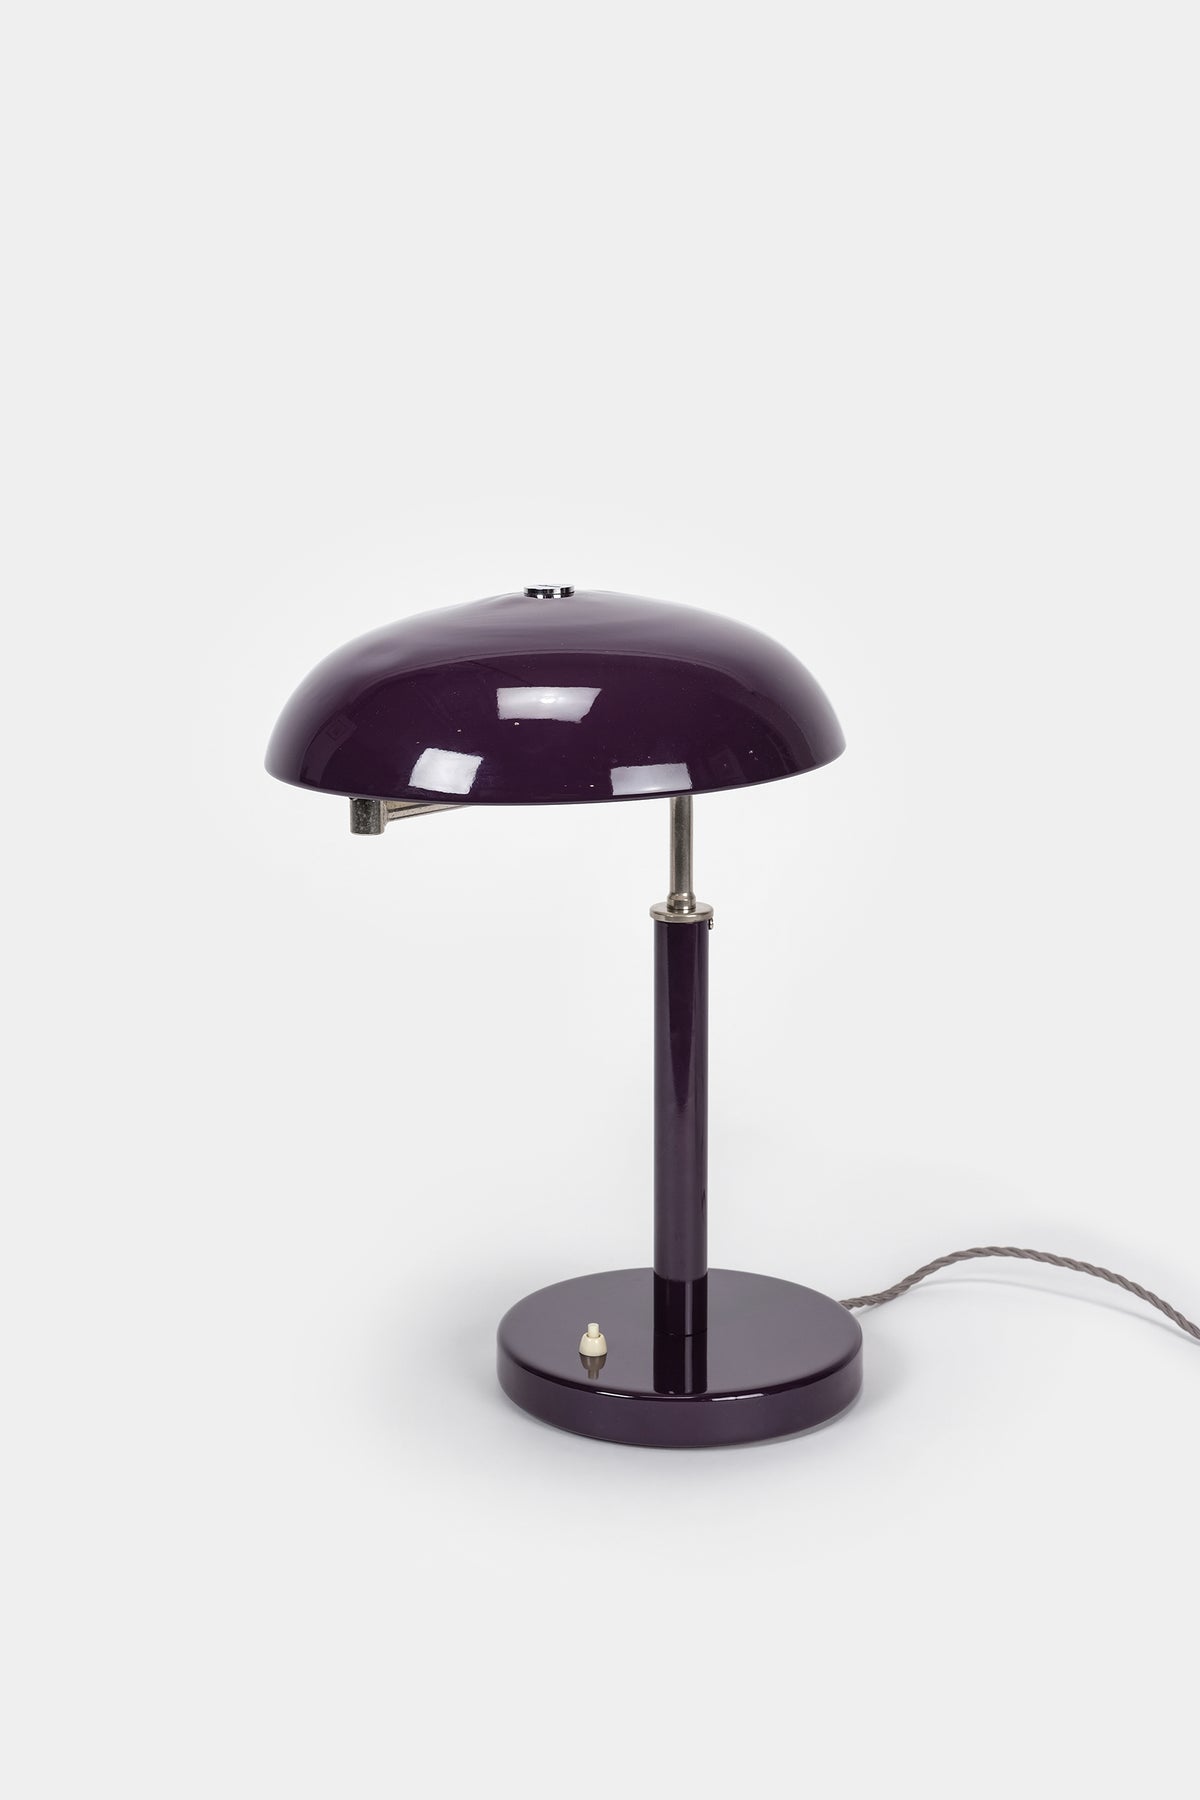 Alfred Müller, Table Lamp "Quick", Belmag, Switzerland, 40s